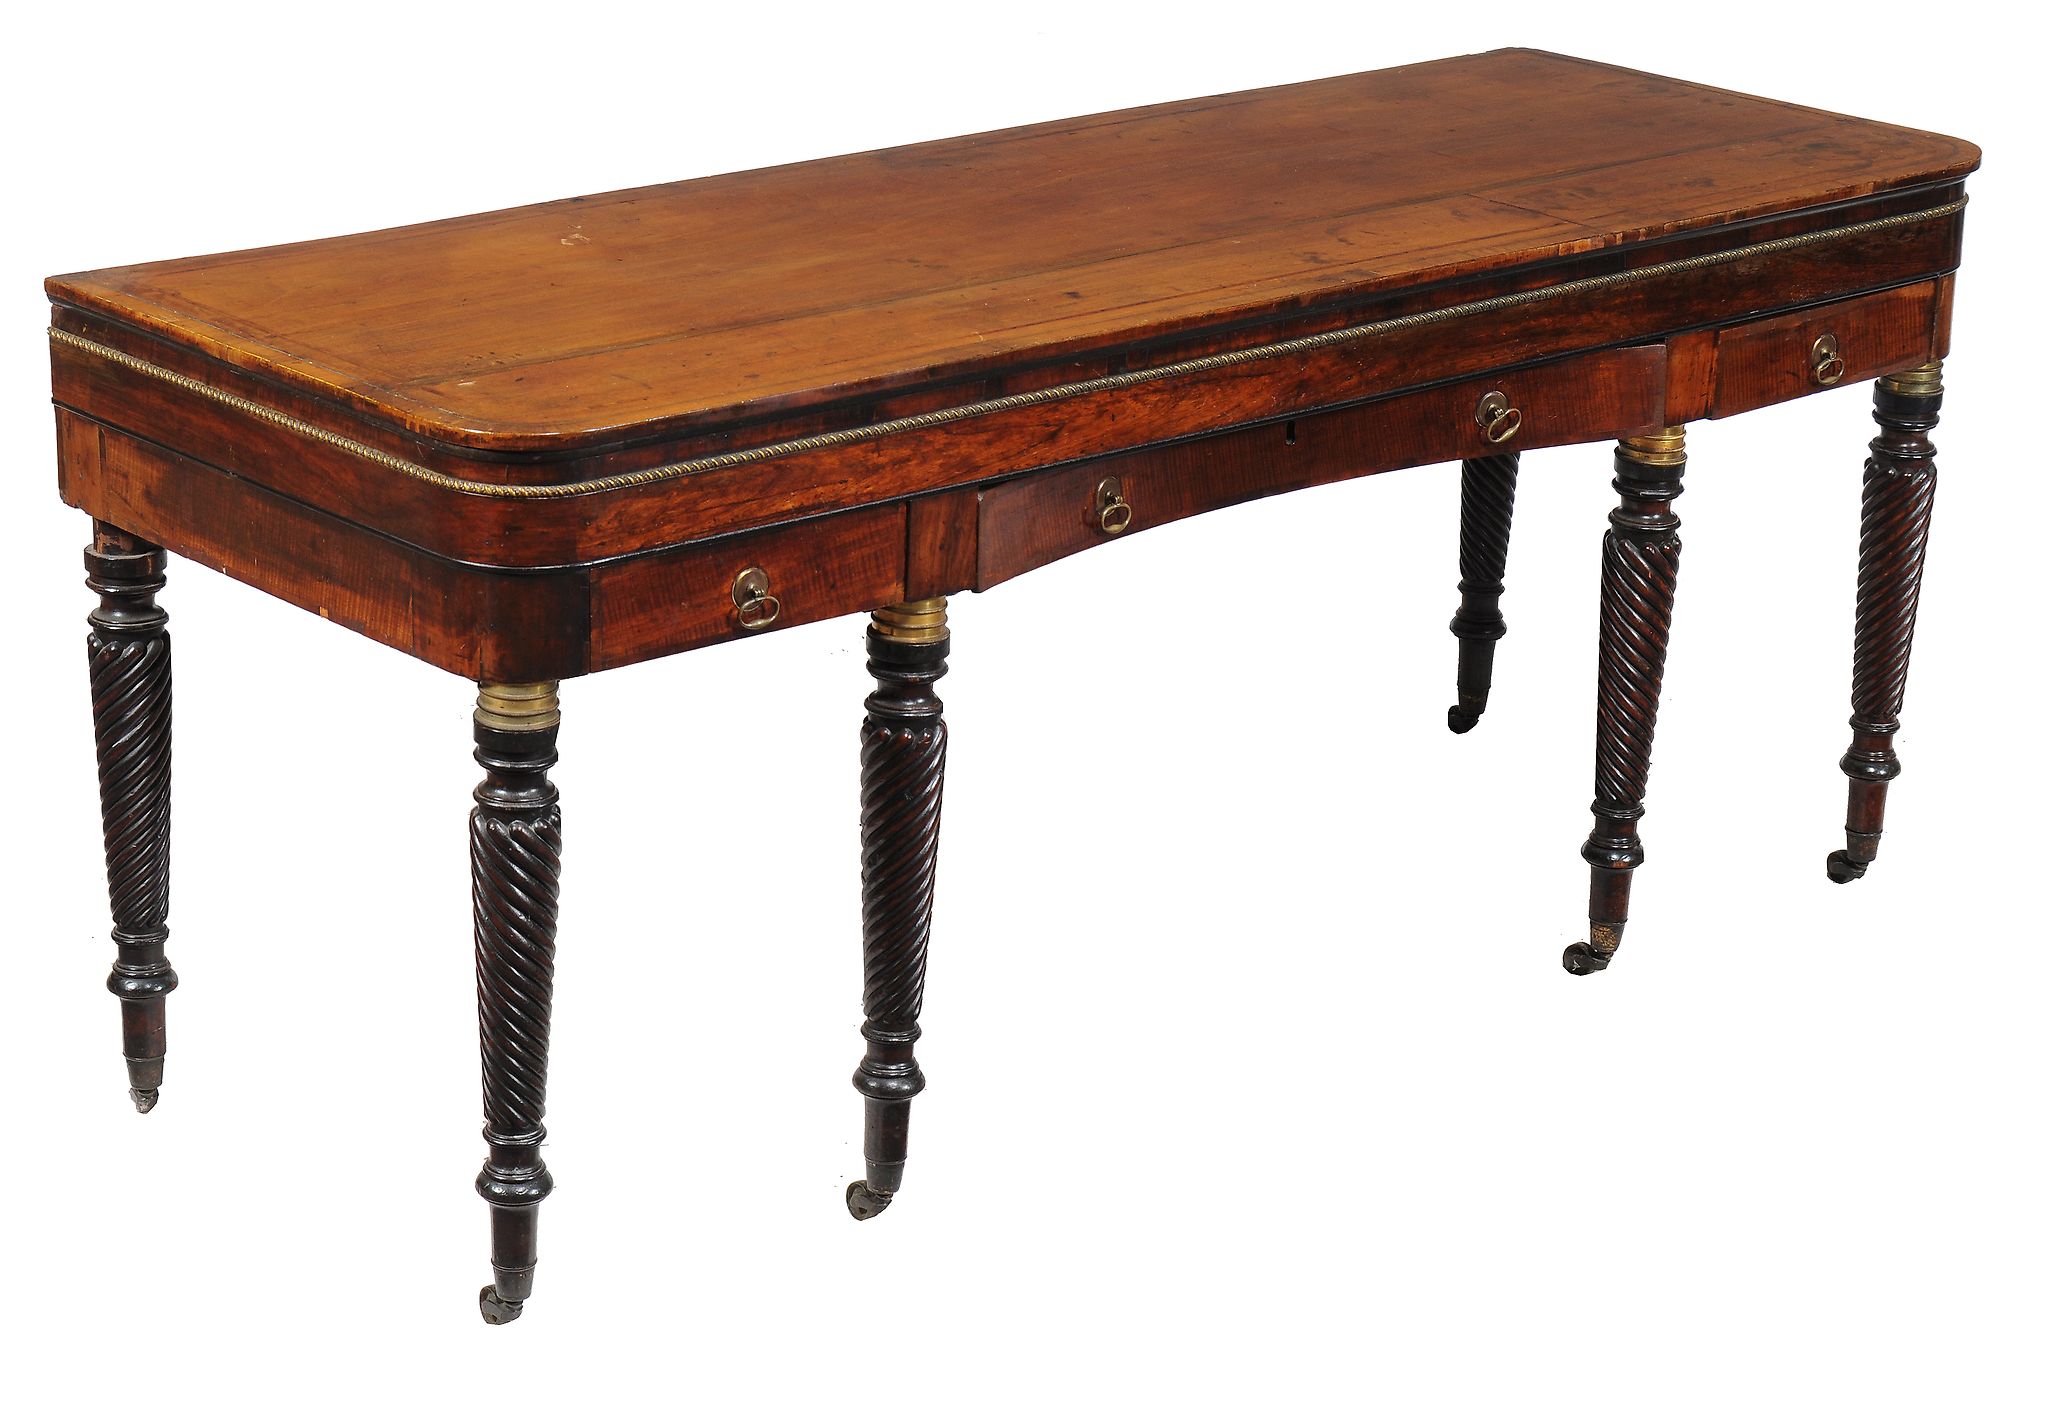 A Regency and gilt metal mounted mahogany piano , circa 1815 and later adapted as a side table,